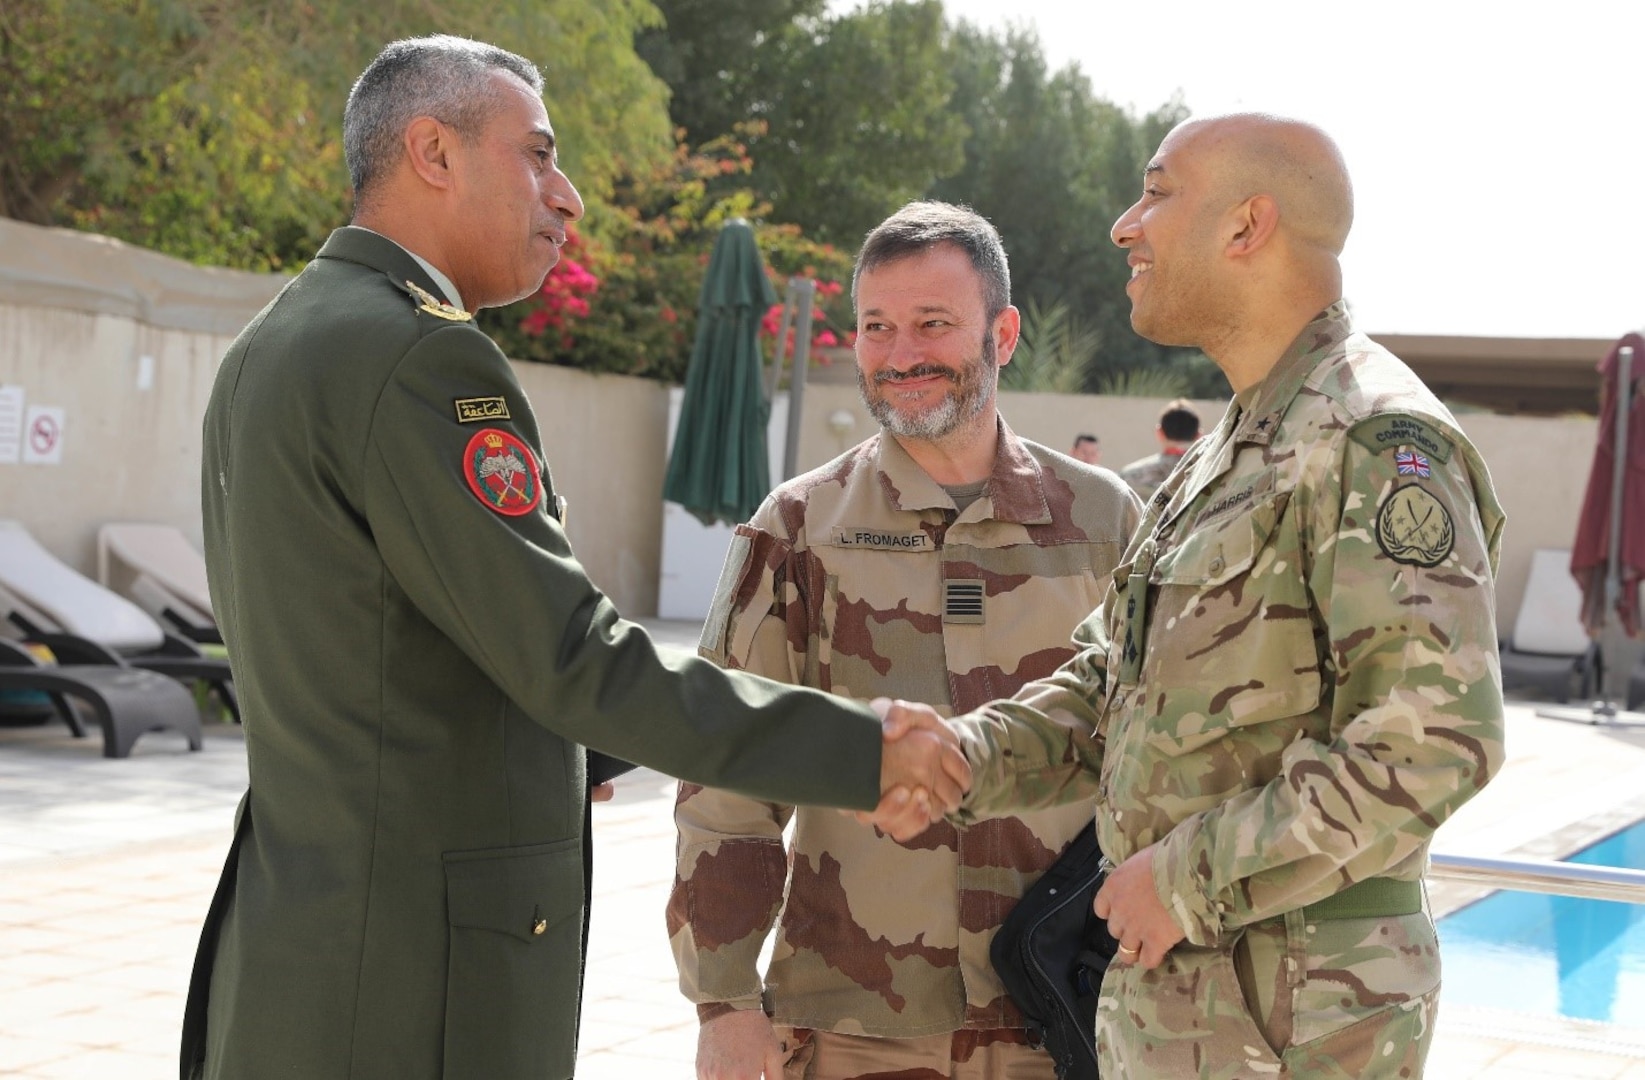 British Brig. Gen. Karl Harris, the deputy commanding general of Combined Joint Task Force – Operation Inherent Resolve (CJTF-OIR), and Jordan Brig. Gen. Raed Saud Alijbour, defense attaché, shake hands before the defense attaché forum begins in Baghdad, Iraq, March 17, 2022. The defense attaché forum serves as an opportunity to build-relationships among Global Coalition members, and as a gateway to discuss topics pertaining to the enduring defeat of Da’esh including Combined Joint Task Force – Operation Inherent Resolve’s progress and areas of needed improvement. (U.S. Army photo by Staff Sgt. Bree-Ann Ramos-Clifton)